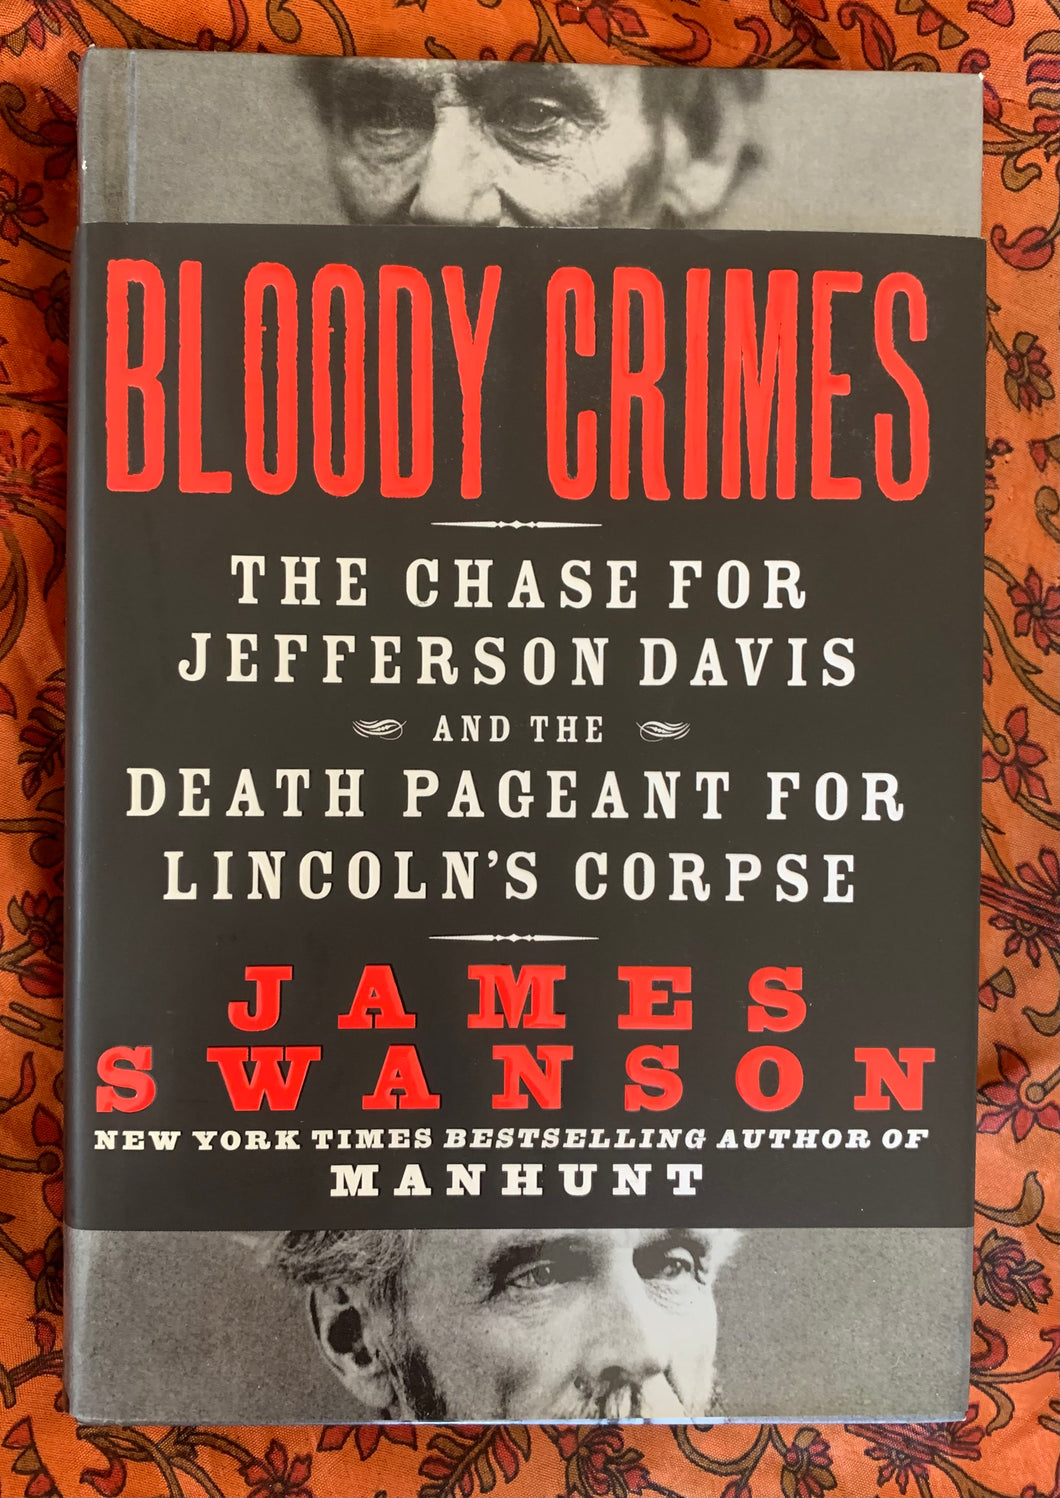 Bloody Crimes: The Chase For Jefferson Davis and the Death Pageant For Lincoln's Corpse